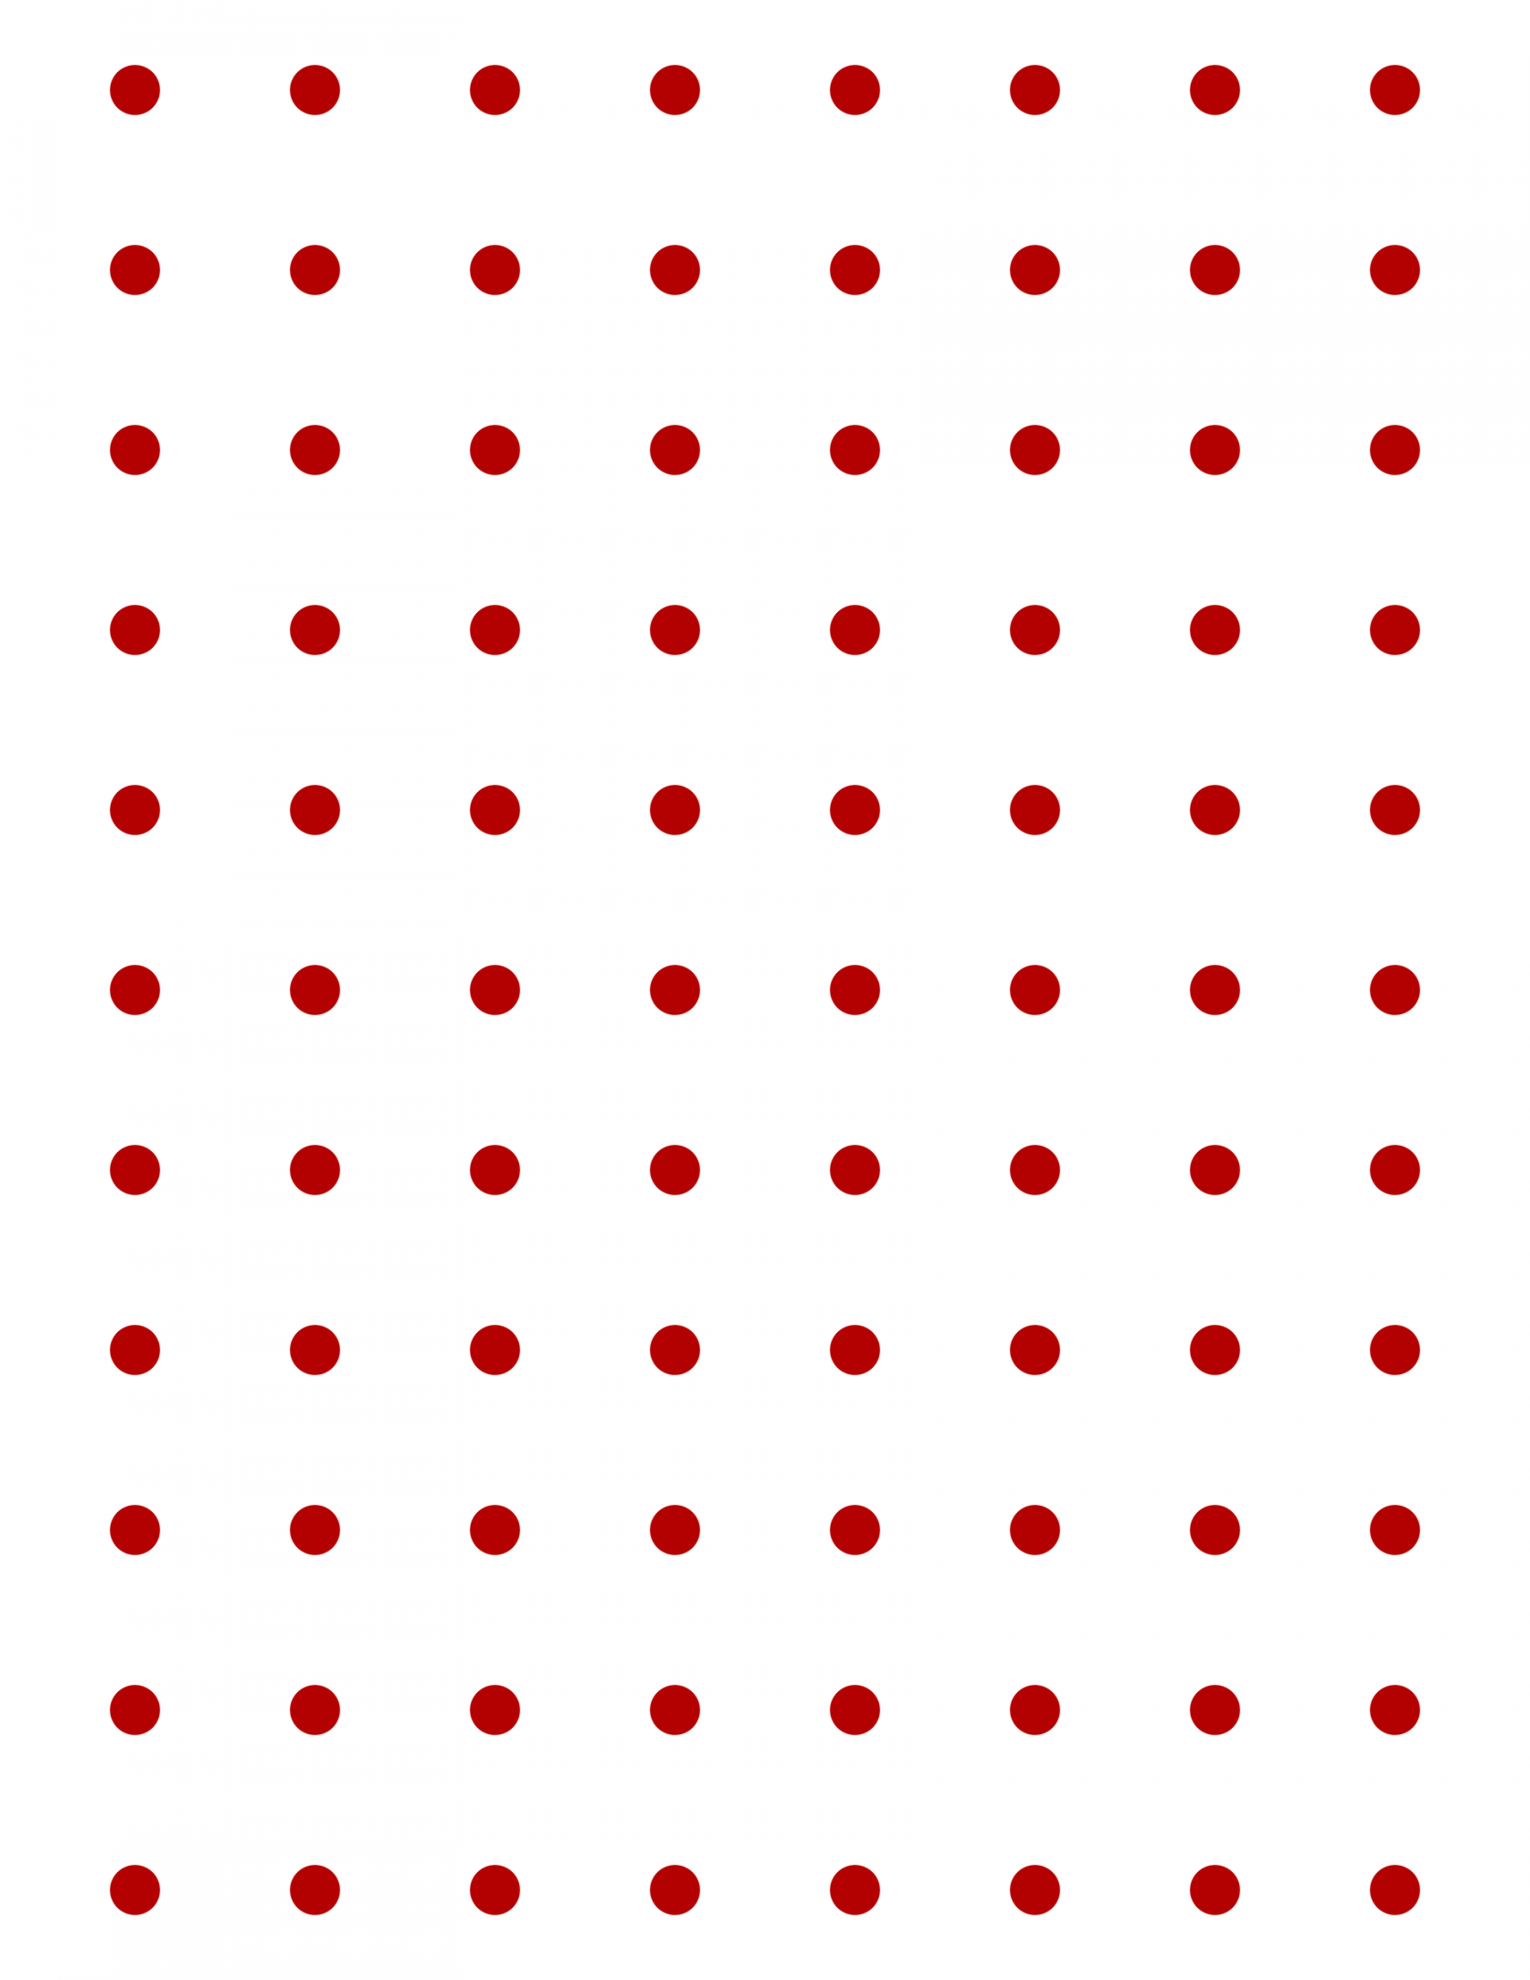 Free Online Graph Paper / Square Dots - FREE Printables - Page Of Dots